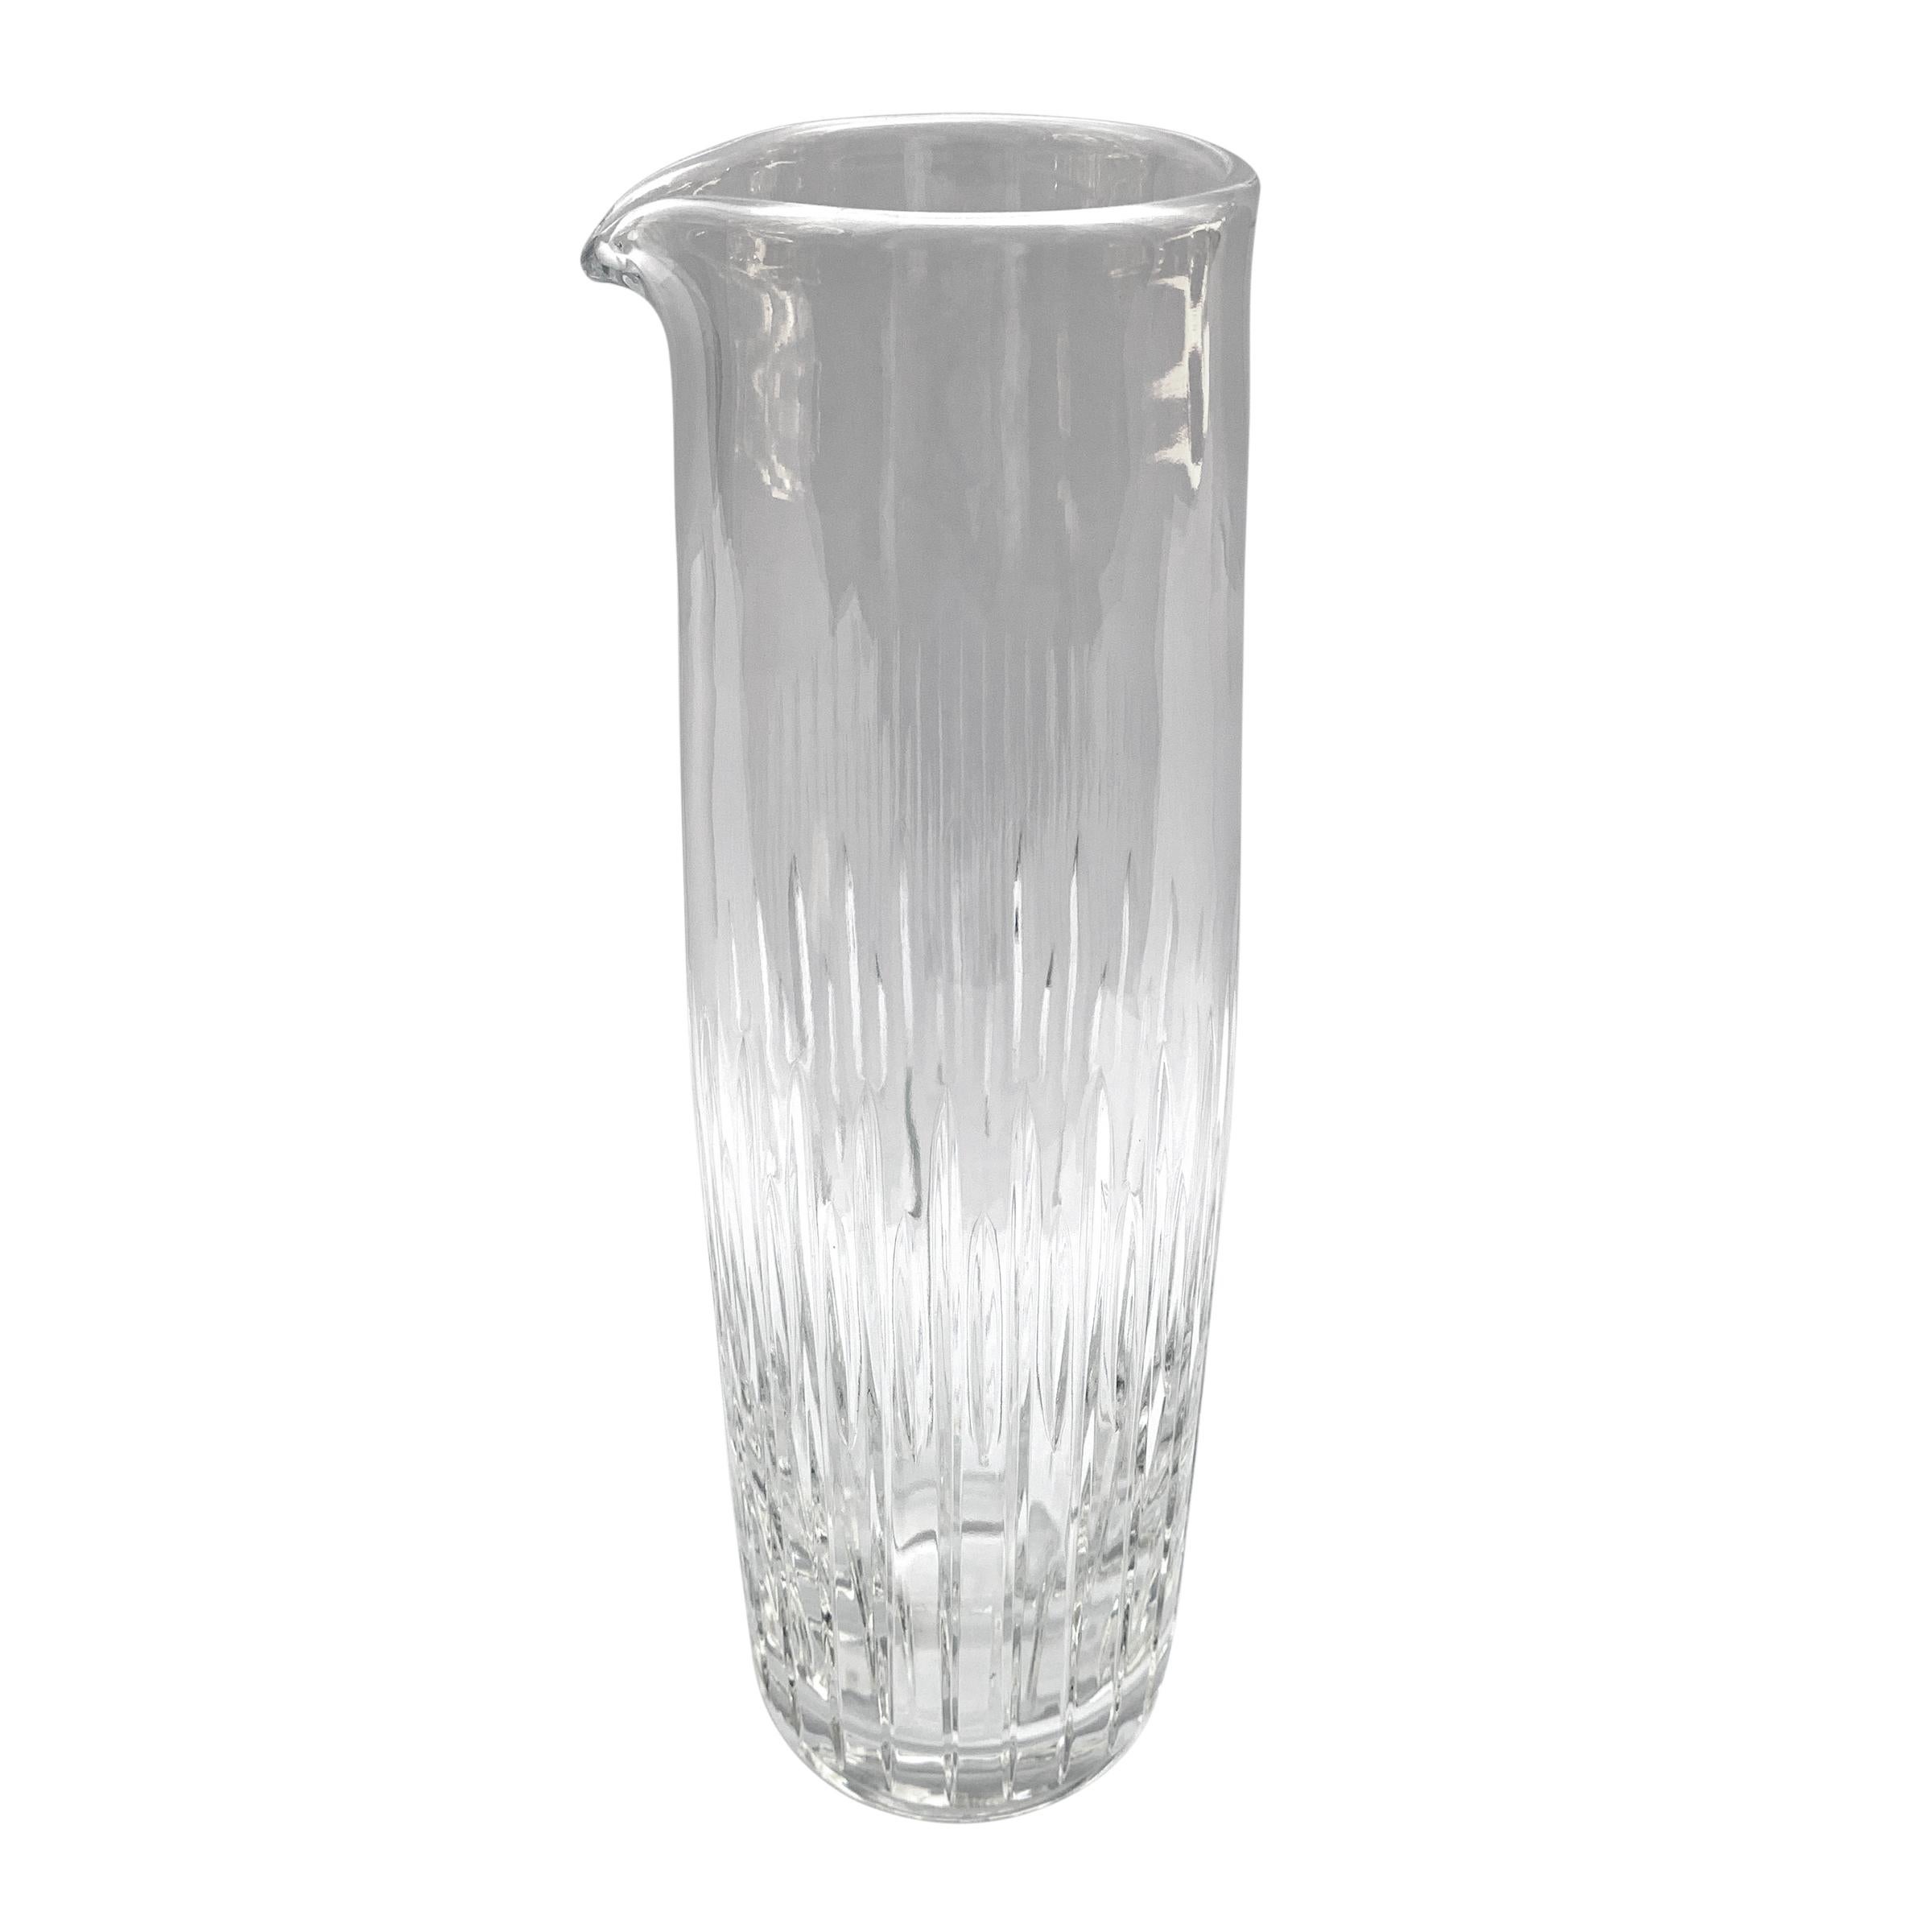 Mid-20th Century Vintage Crystal Cocktail Pitcher